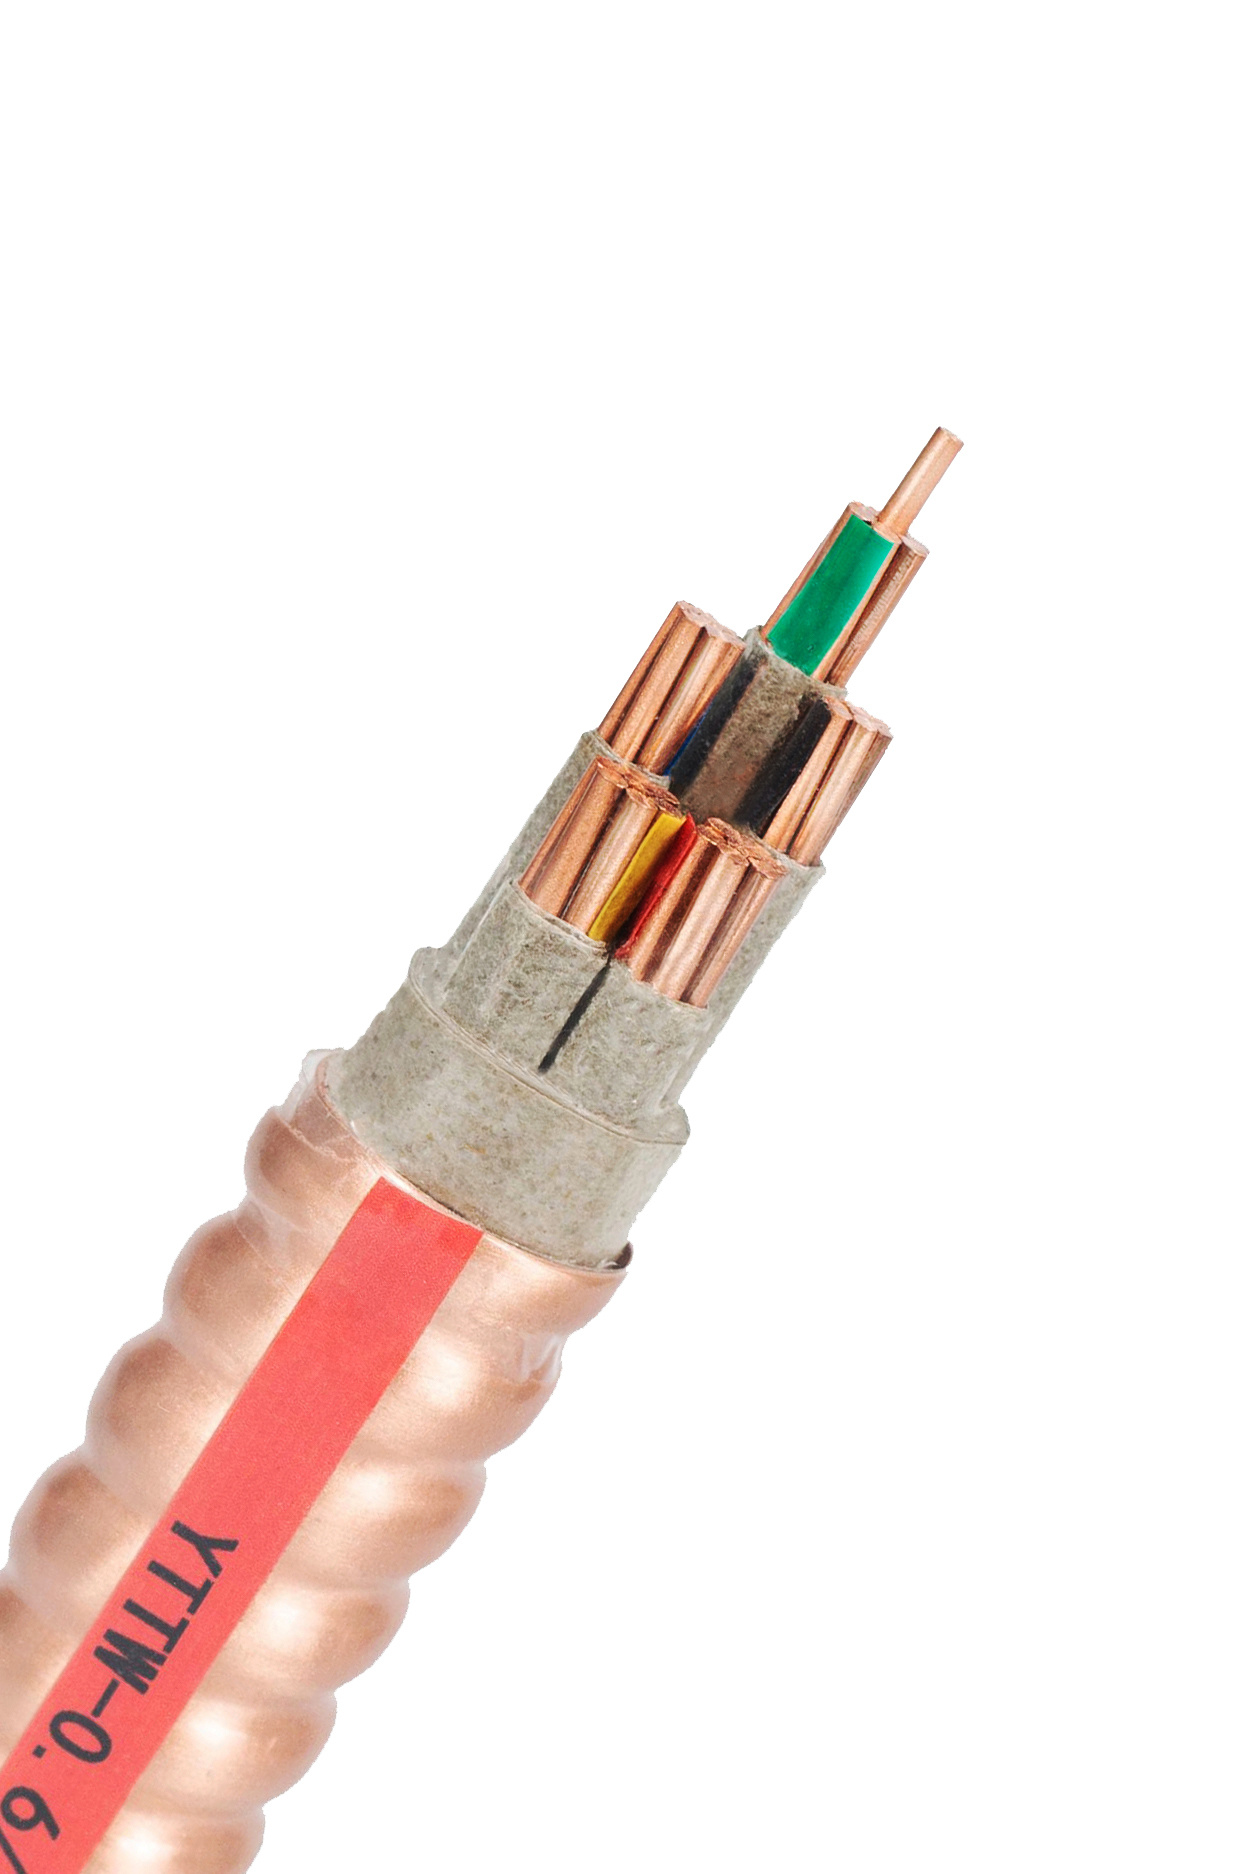 500mcm Use-2, Rhw-2 or Rhh Copper Conductor XLPE Insulation Heat and Moisture Resistant Flame Retardant 600V Cable